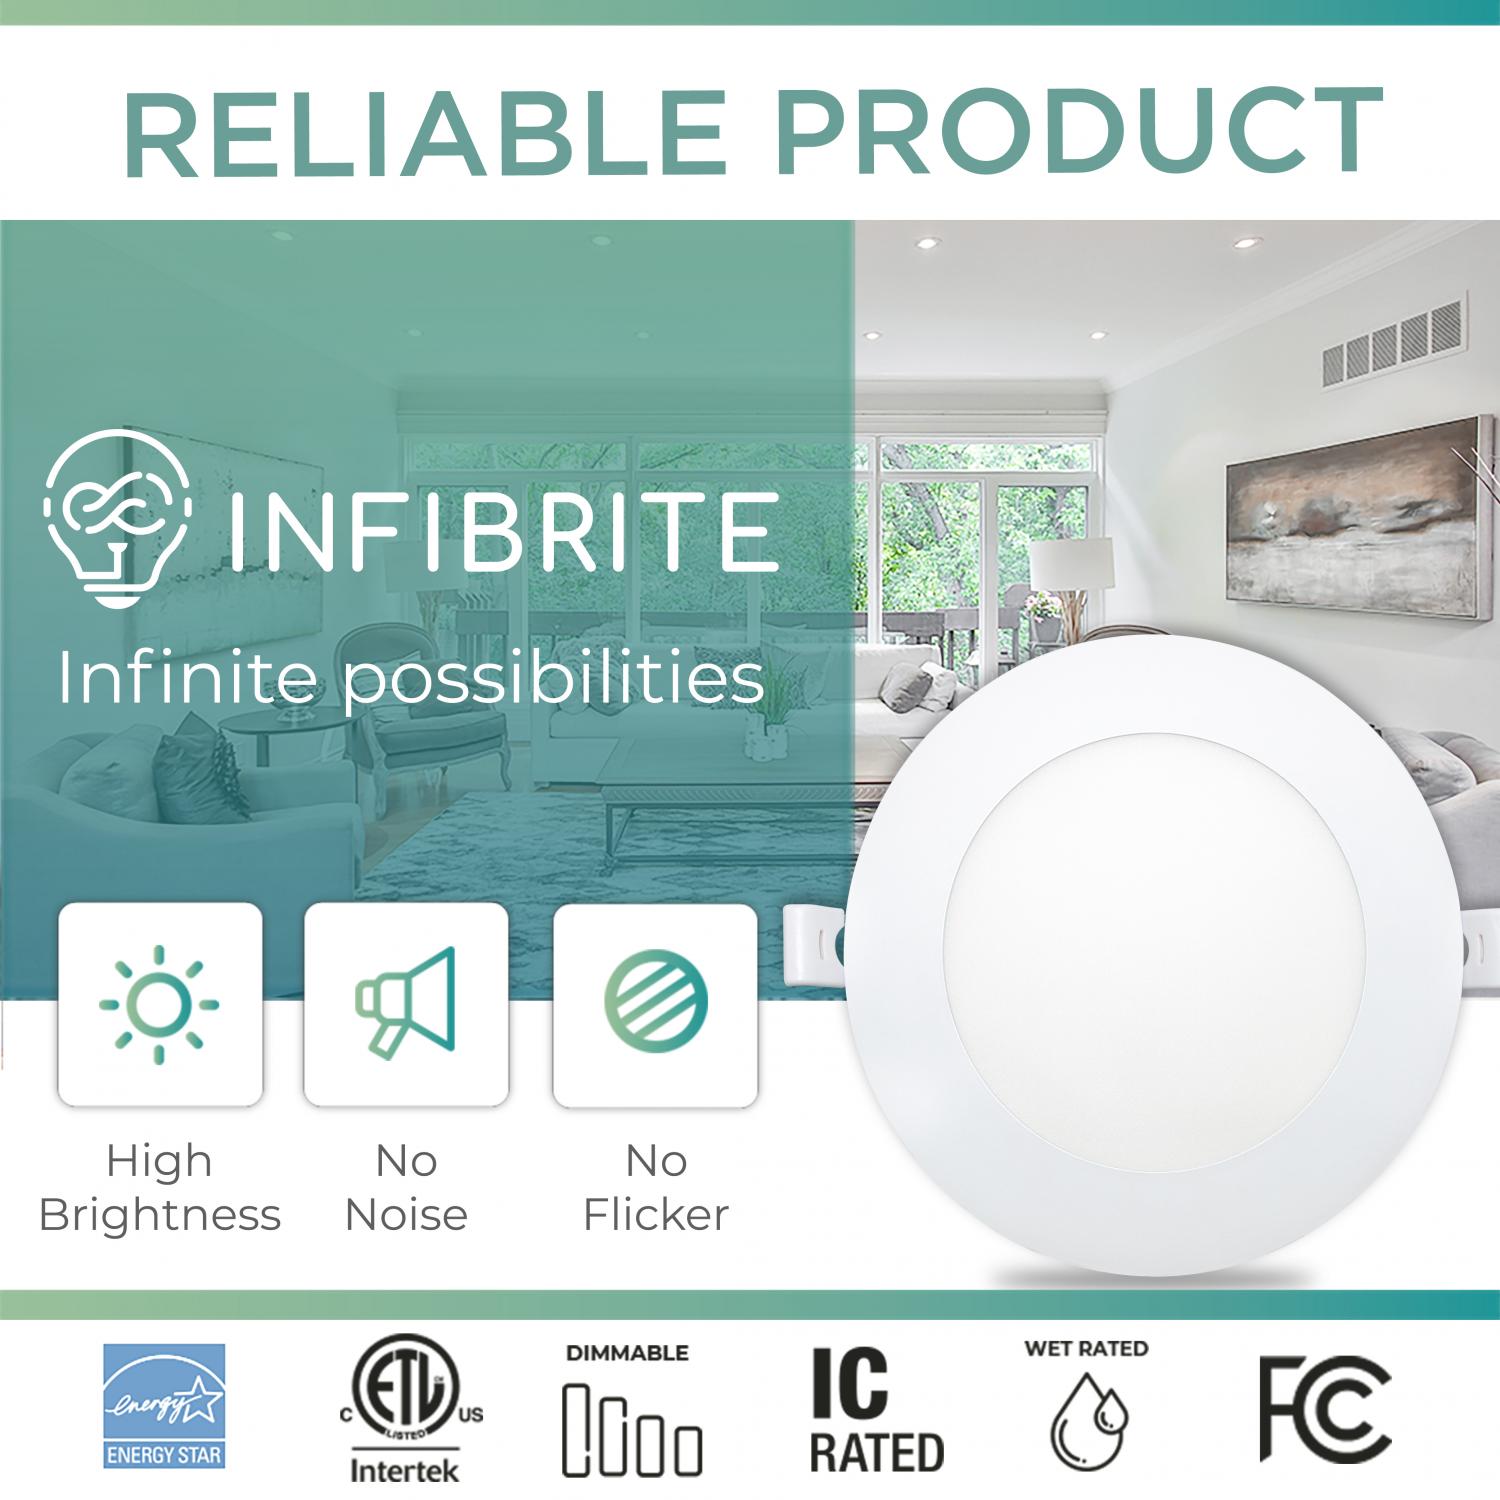 Infibrite 4 Inch 5000K Daylight 9W 750 LM Ultra-Slim LED Ceiling Light with Junction Box, Flush Mount, Dimmable, Fixture for Bedroom, Wet Rated for Bathroom, Easy Install, 75W Eqv, ETL & Energy Star, US Company